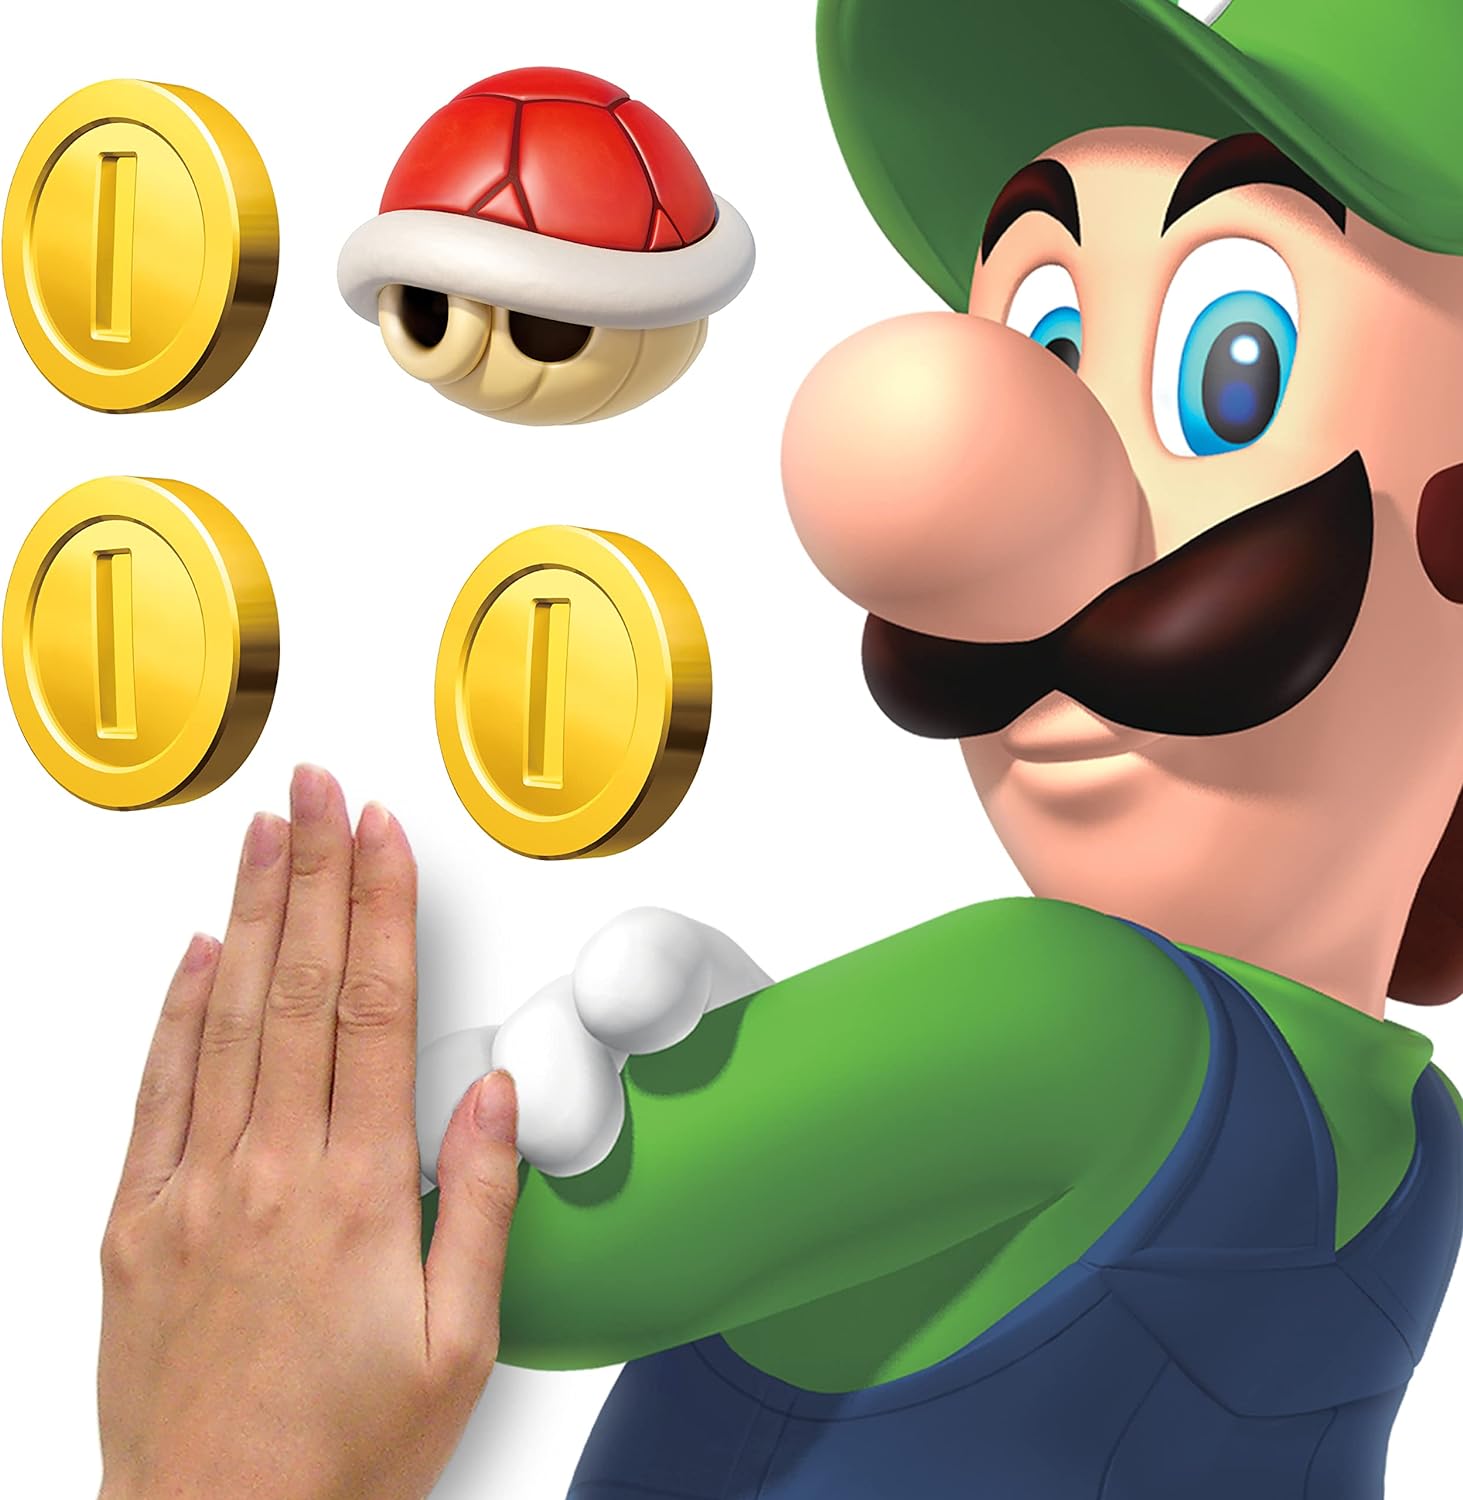 Super Luigi and Mario Wall Decals Review